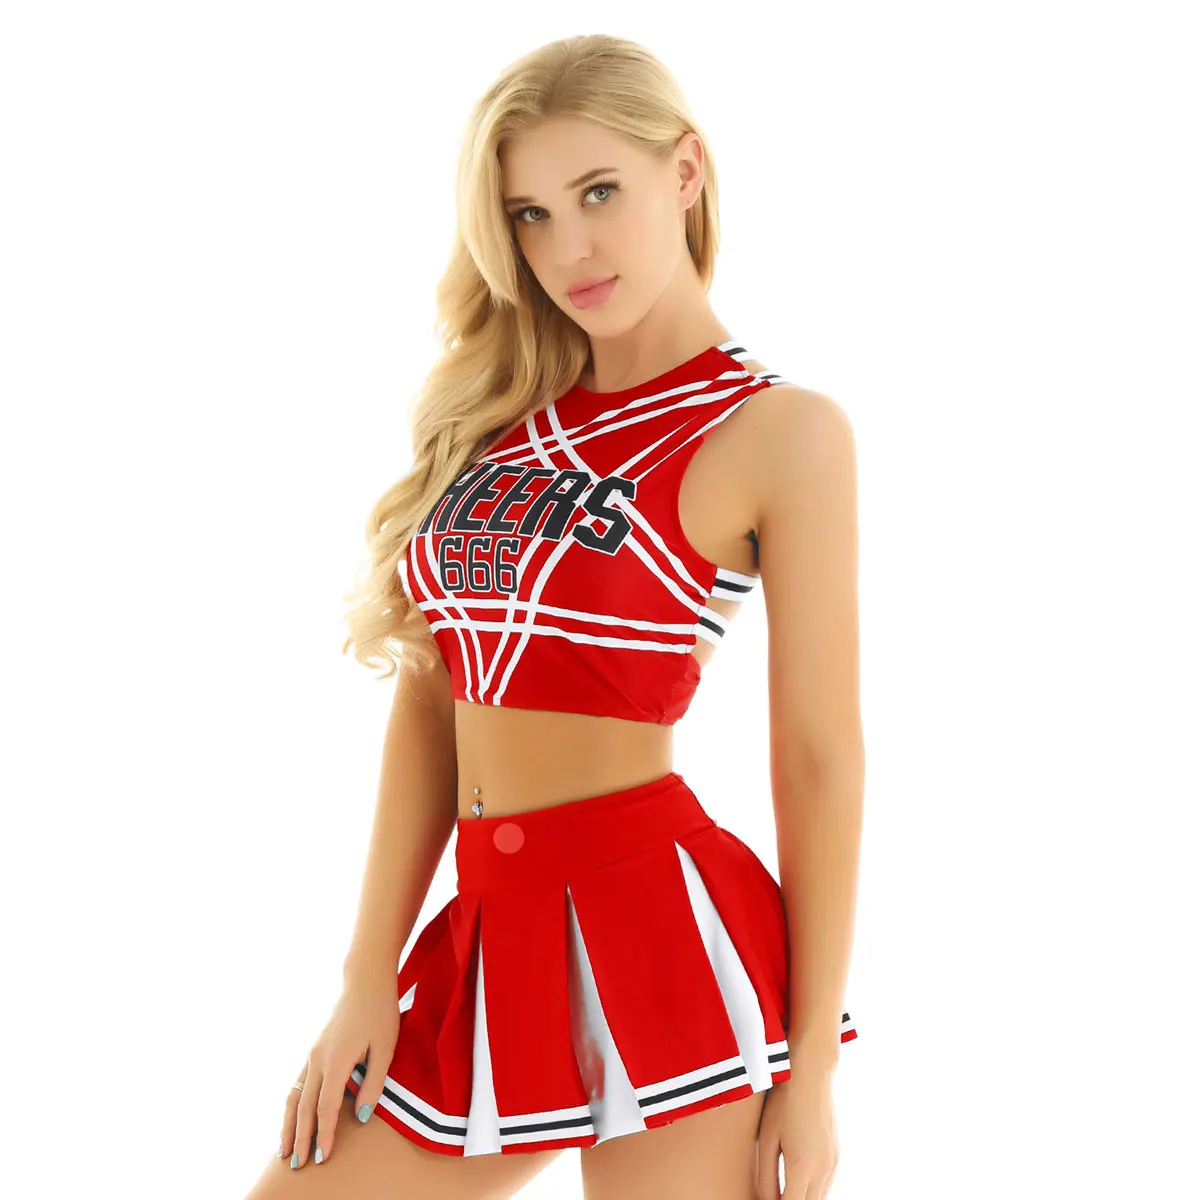 Womens Adult Charming Cheerleading School Girls Cosplay Costume Set Sleeveless Pentagram Back Crop Top with Mini Pleated Skirt 2pcs women adults cheerleading costume uniform stand collar sleeveless crop top with mini pleated skirt cheerleader dance outfit